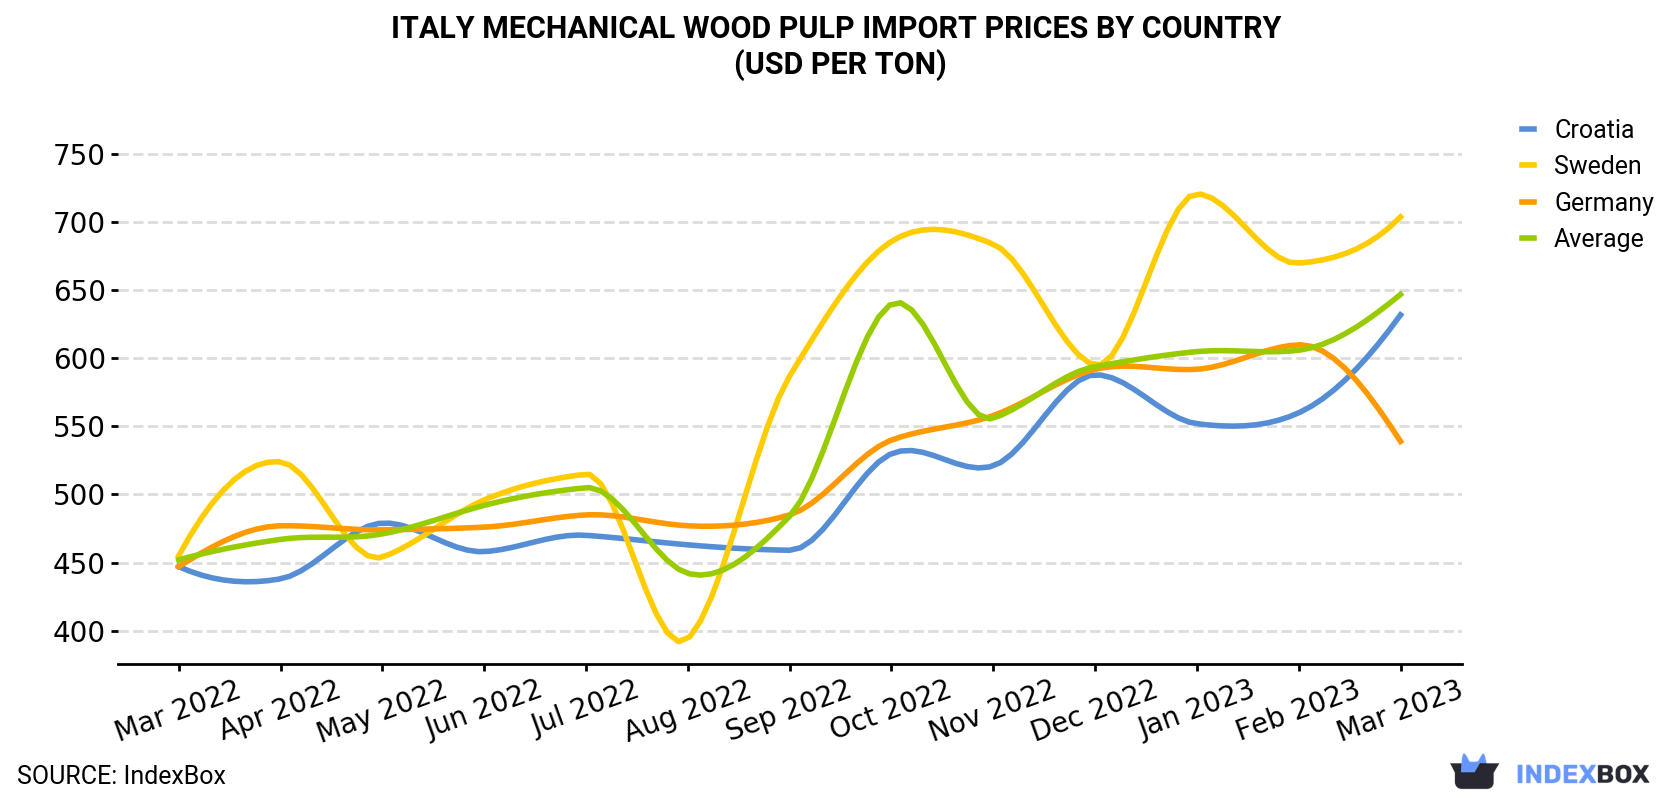 Italy Mechanical Wood Pulp Import Prices By Country (USD Per Ton)